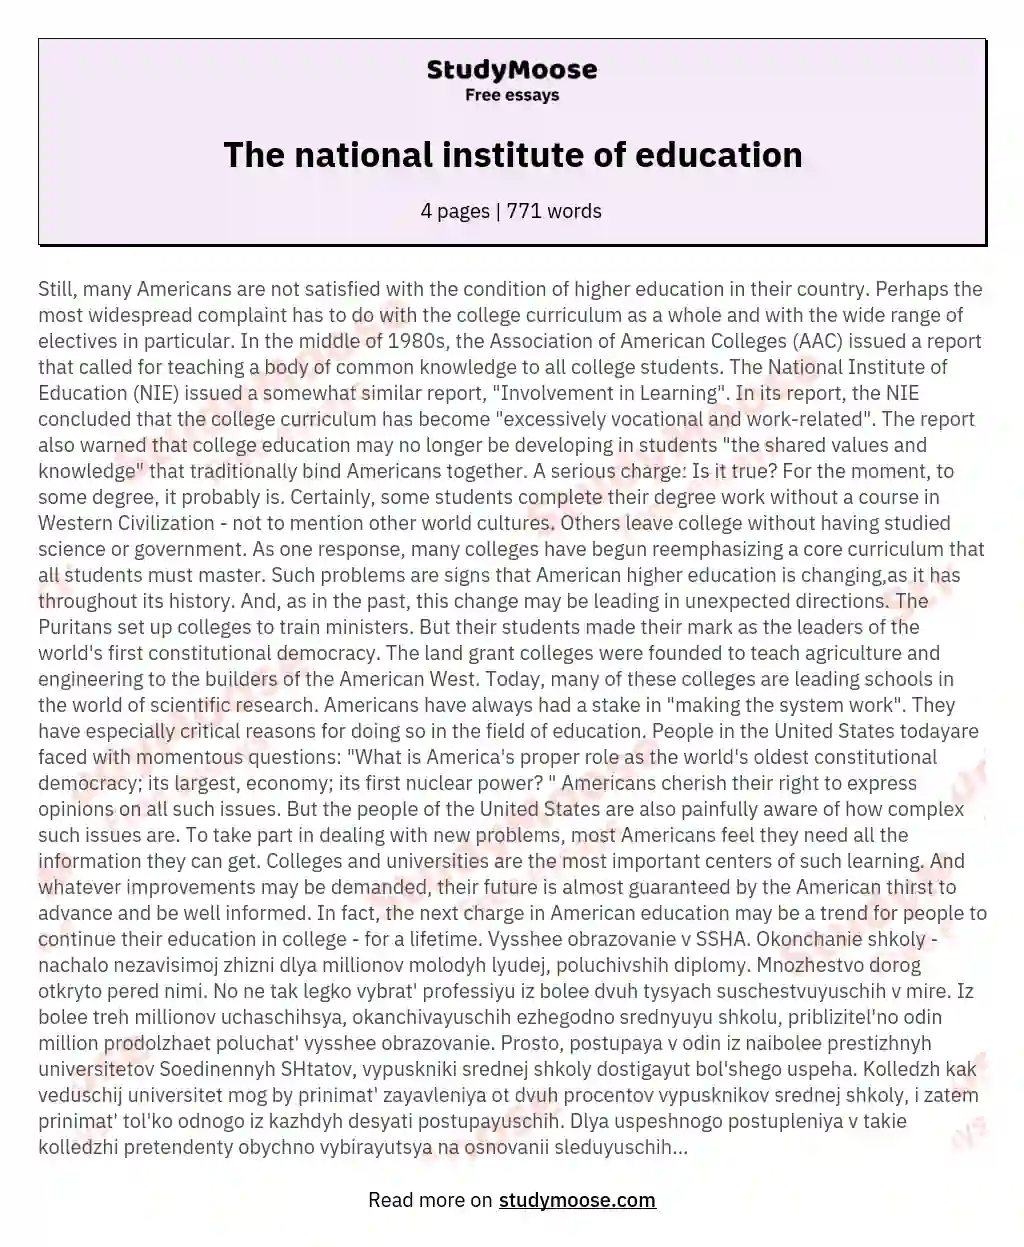 The national institute of education